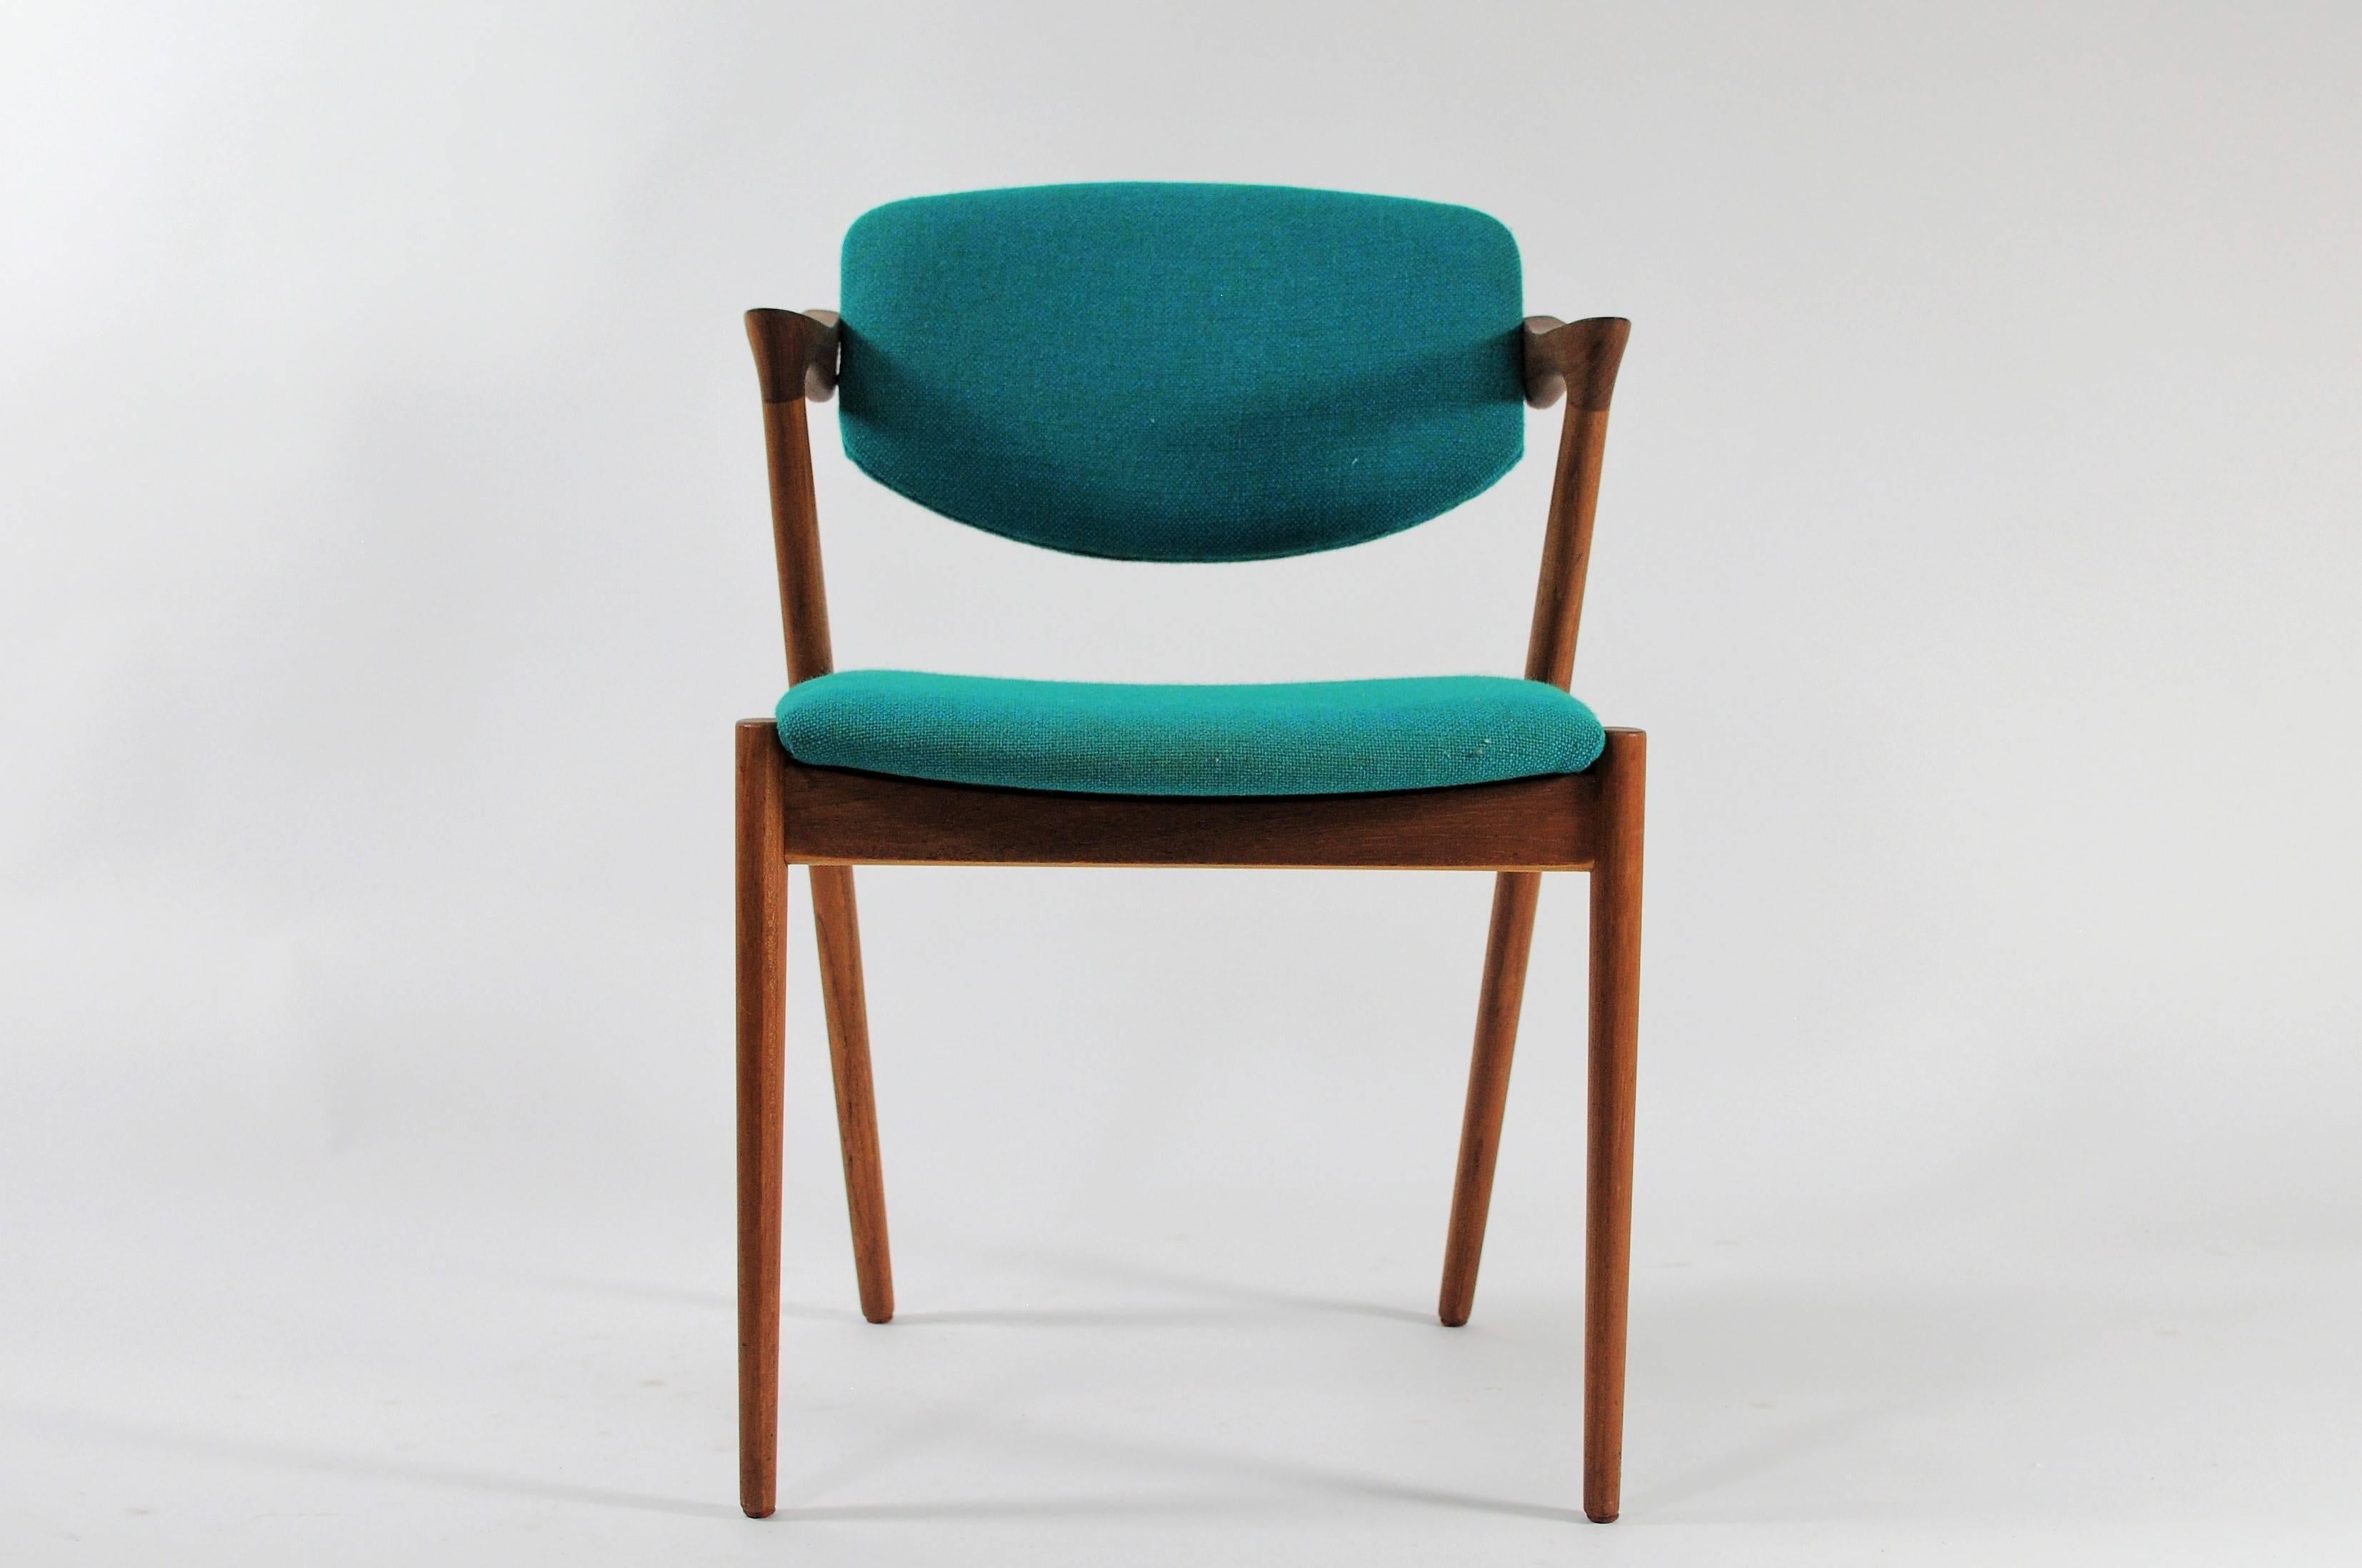 Set of six original fully restored, 1960s teak dining chairs by Kai Kristiansen for Schous Møbelfabrik.

The chairs have Kai Kristiansens typical light and elegant design that make them fit in easily where you want them in your home - a design that